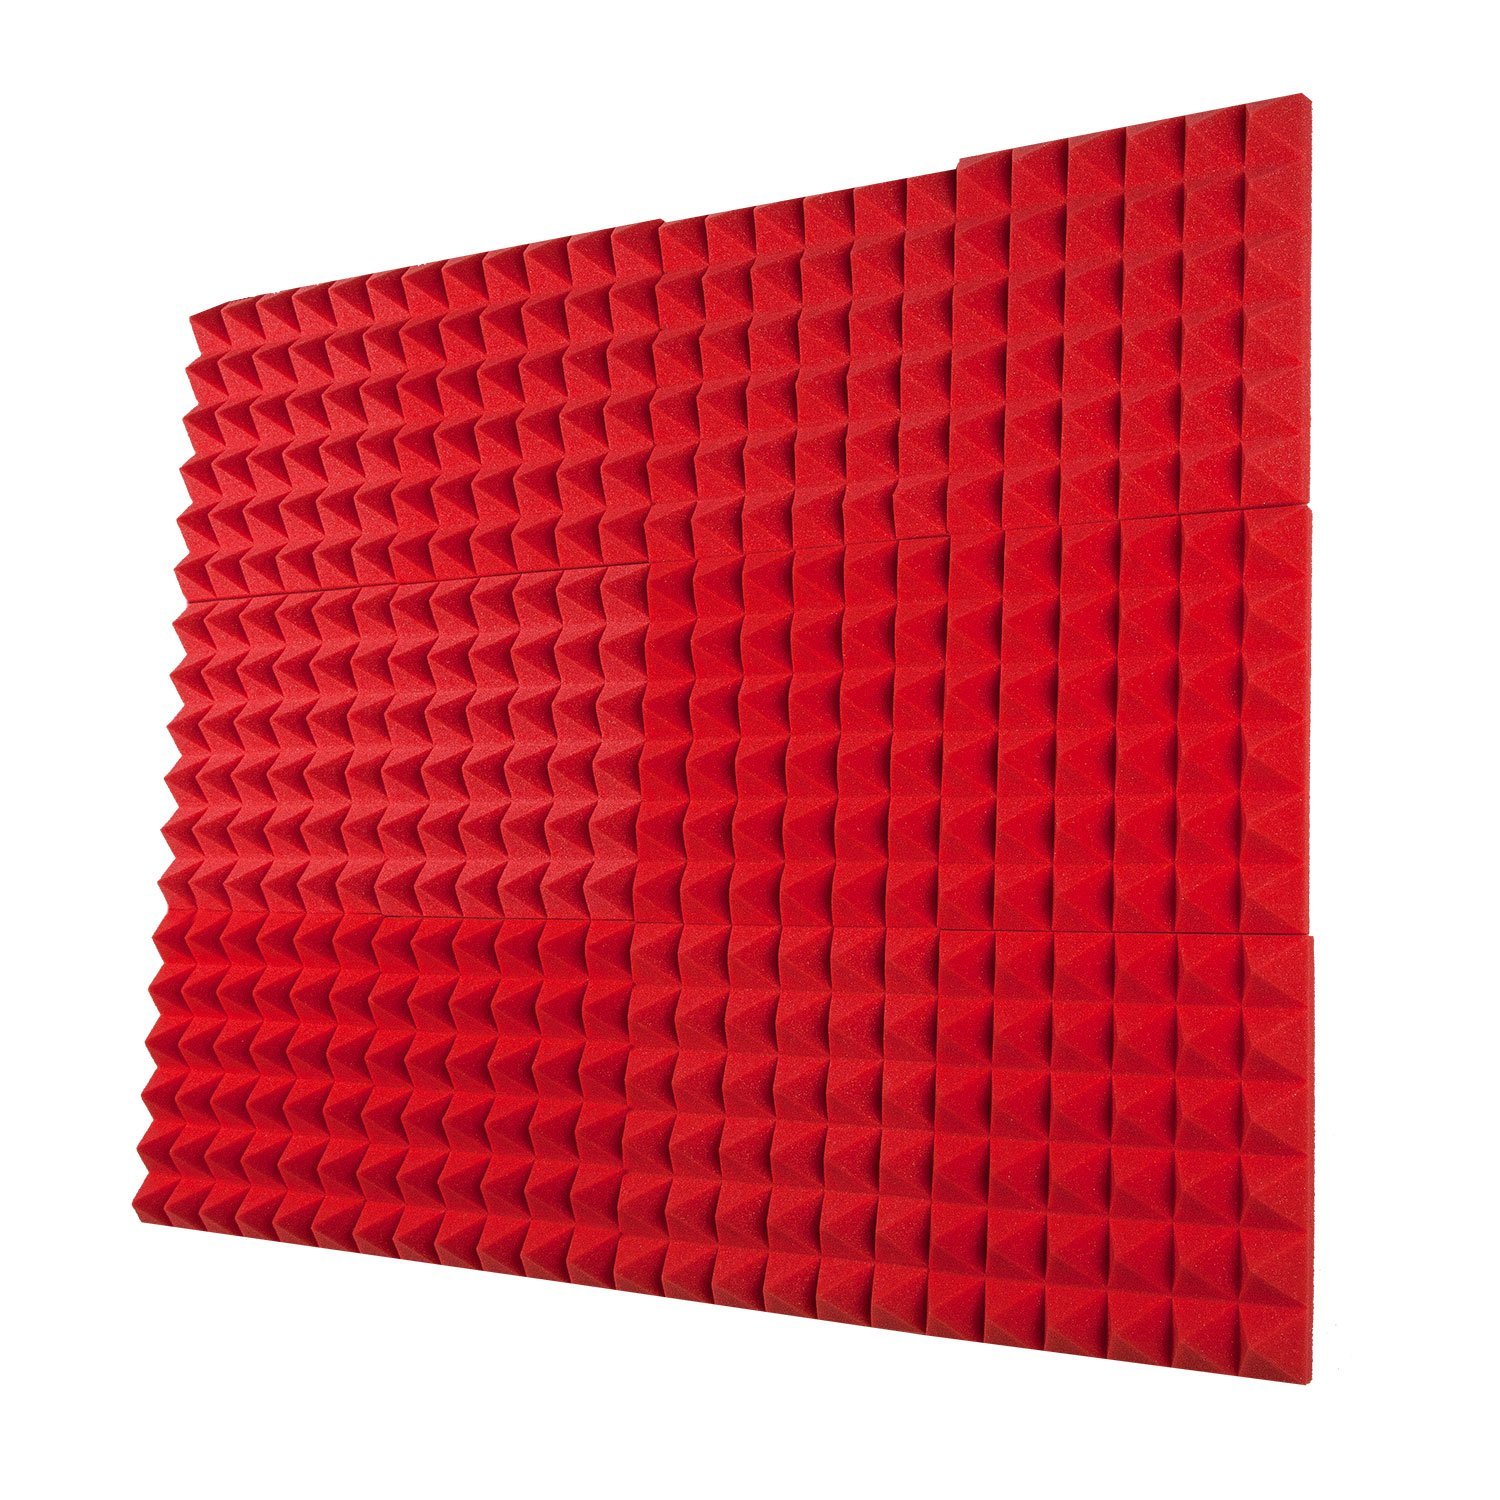 Luc 12pcs Acoustic Foam Panels Black/Red Pyramid Sound Absorbing Treatment Panels Noise Cancelling Mat 30x30x2.5 cm for KTV Studios Offices Home